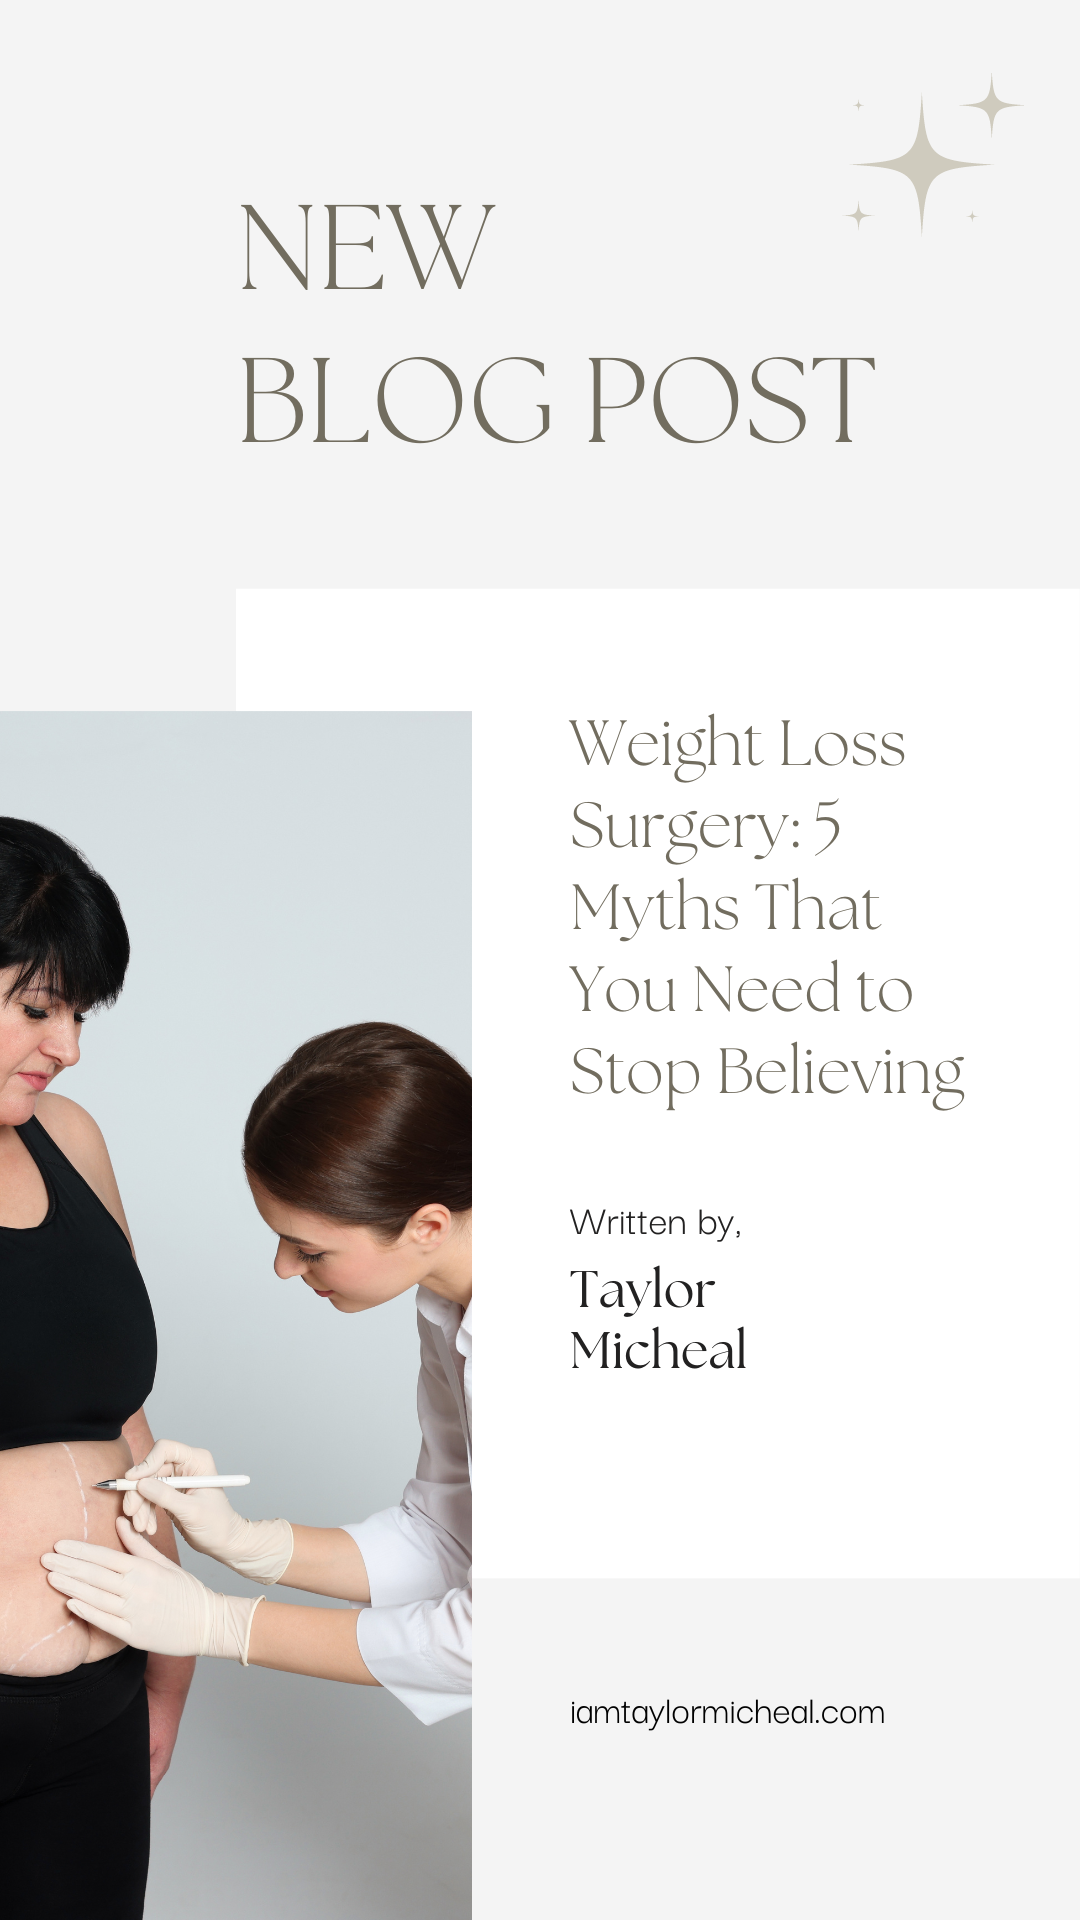 Weight Loss Surgery: 5 Myths That You Need to Stop Believing